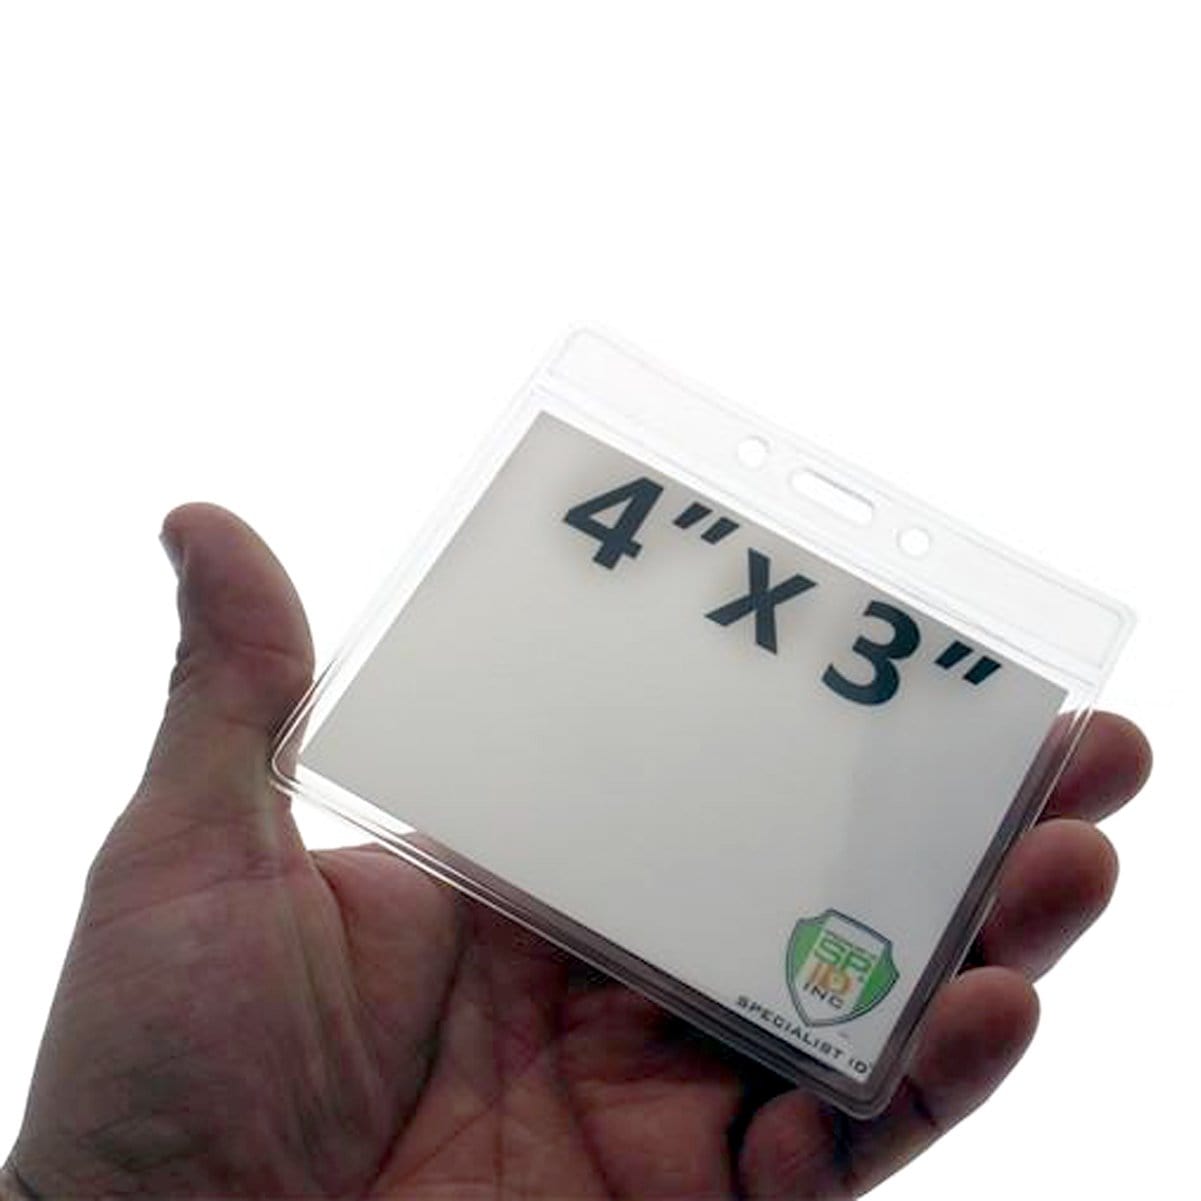 3 x 4 Portrait Clear PVC ID Card Holder At Lowest Prices